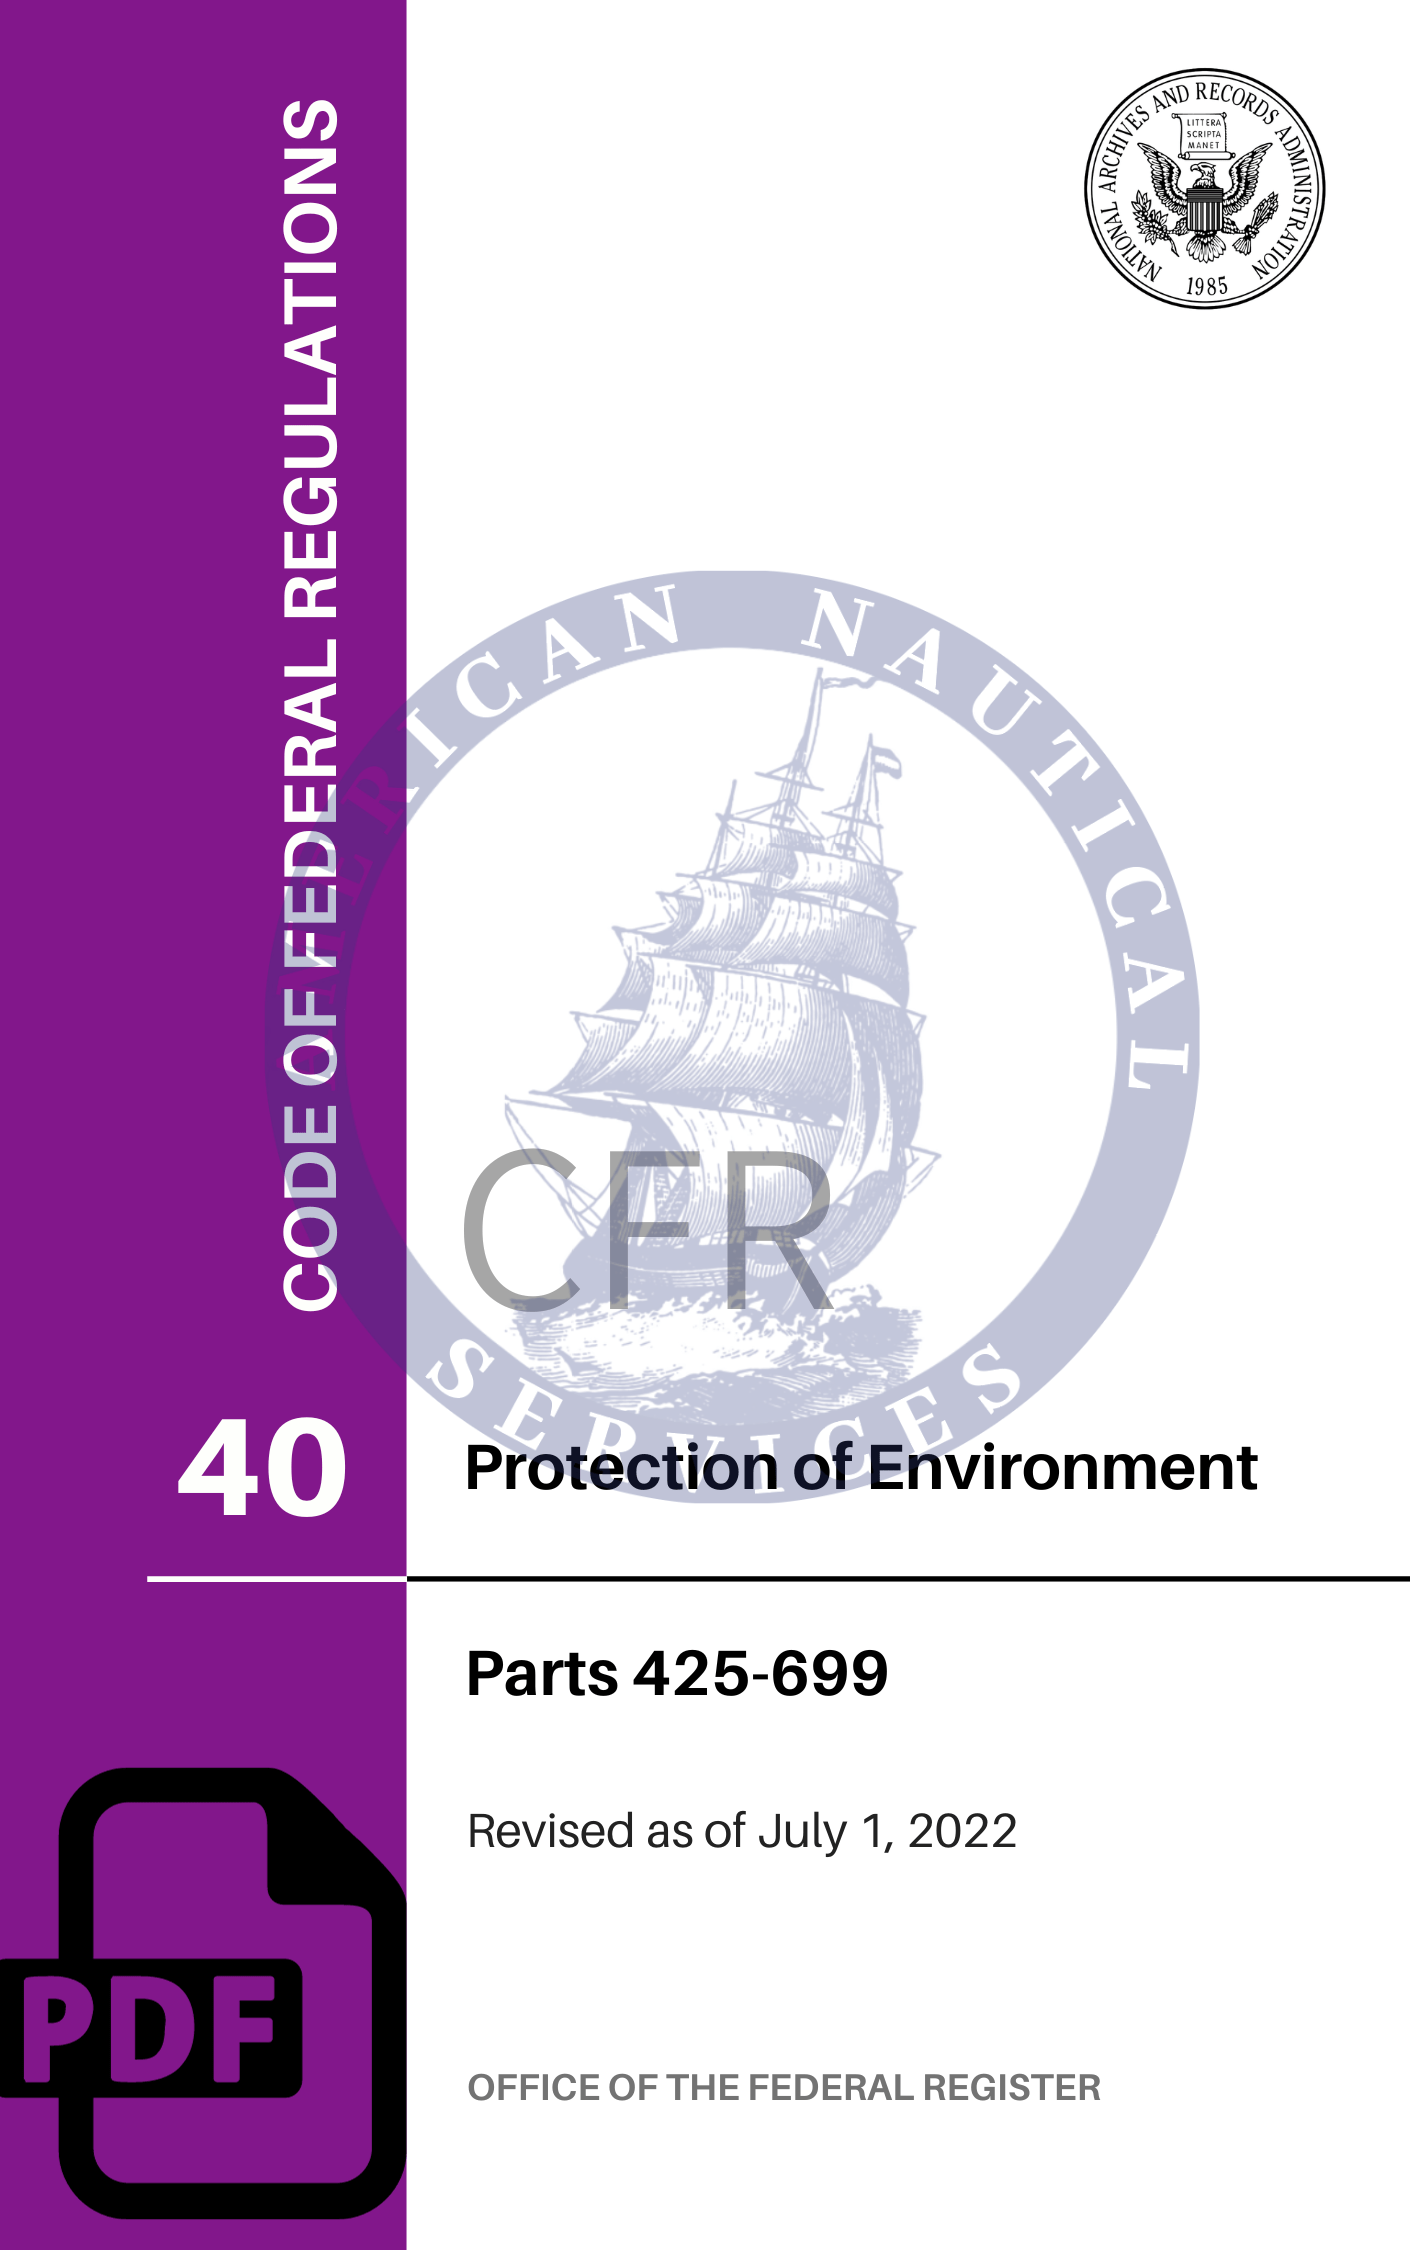 CFR Title 40: Parts 425-699 - Protection of Environment (Code of Federal Regulations), 2022 Edition